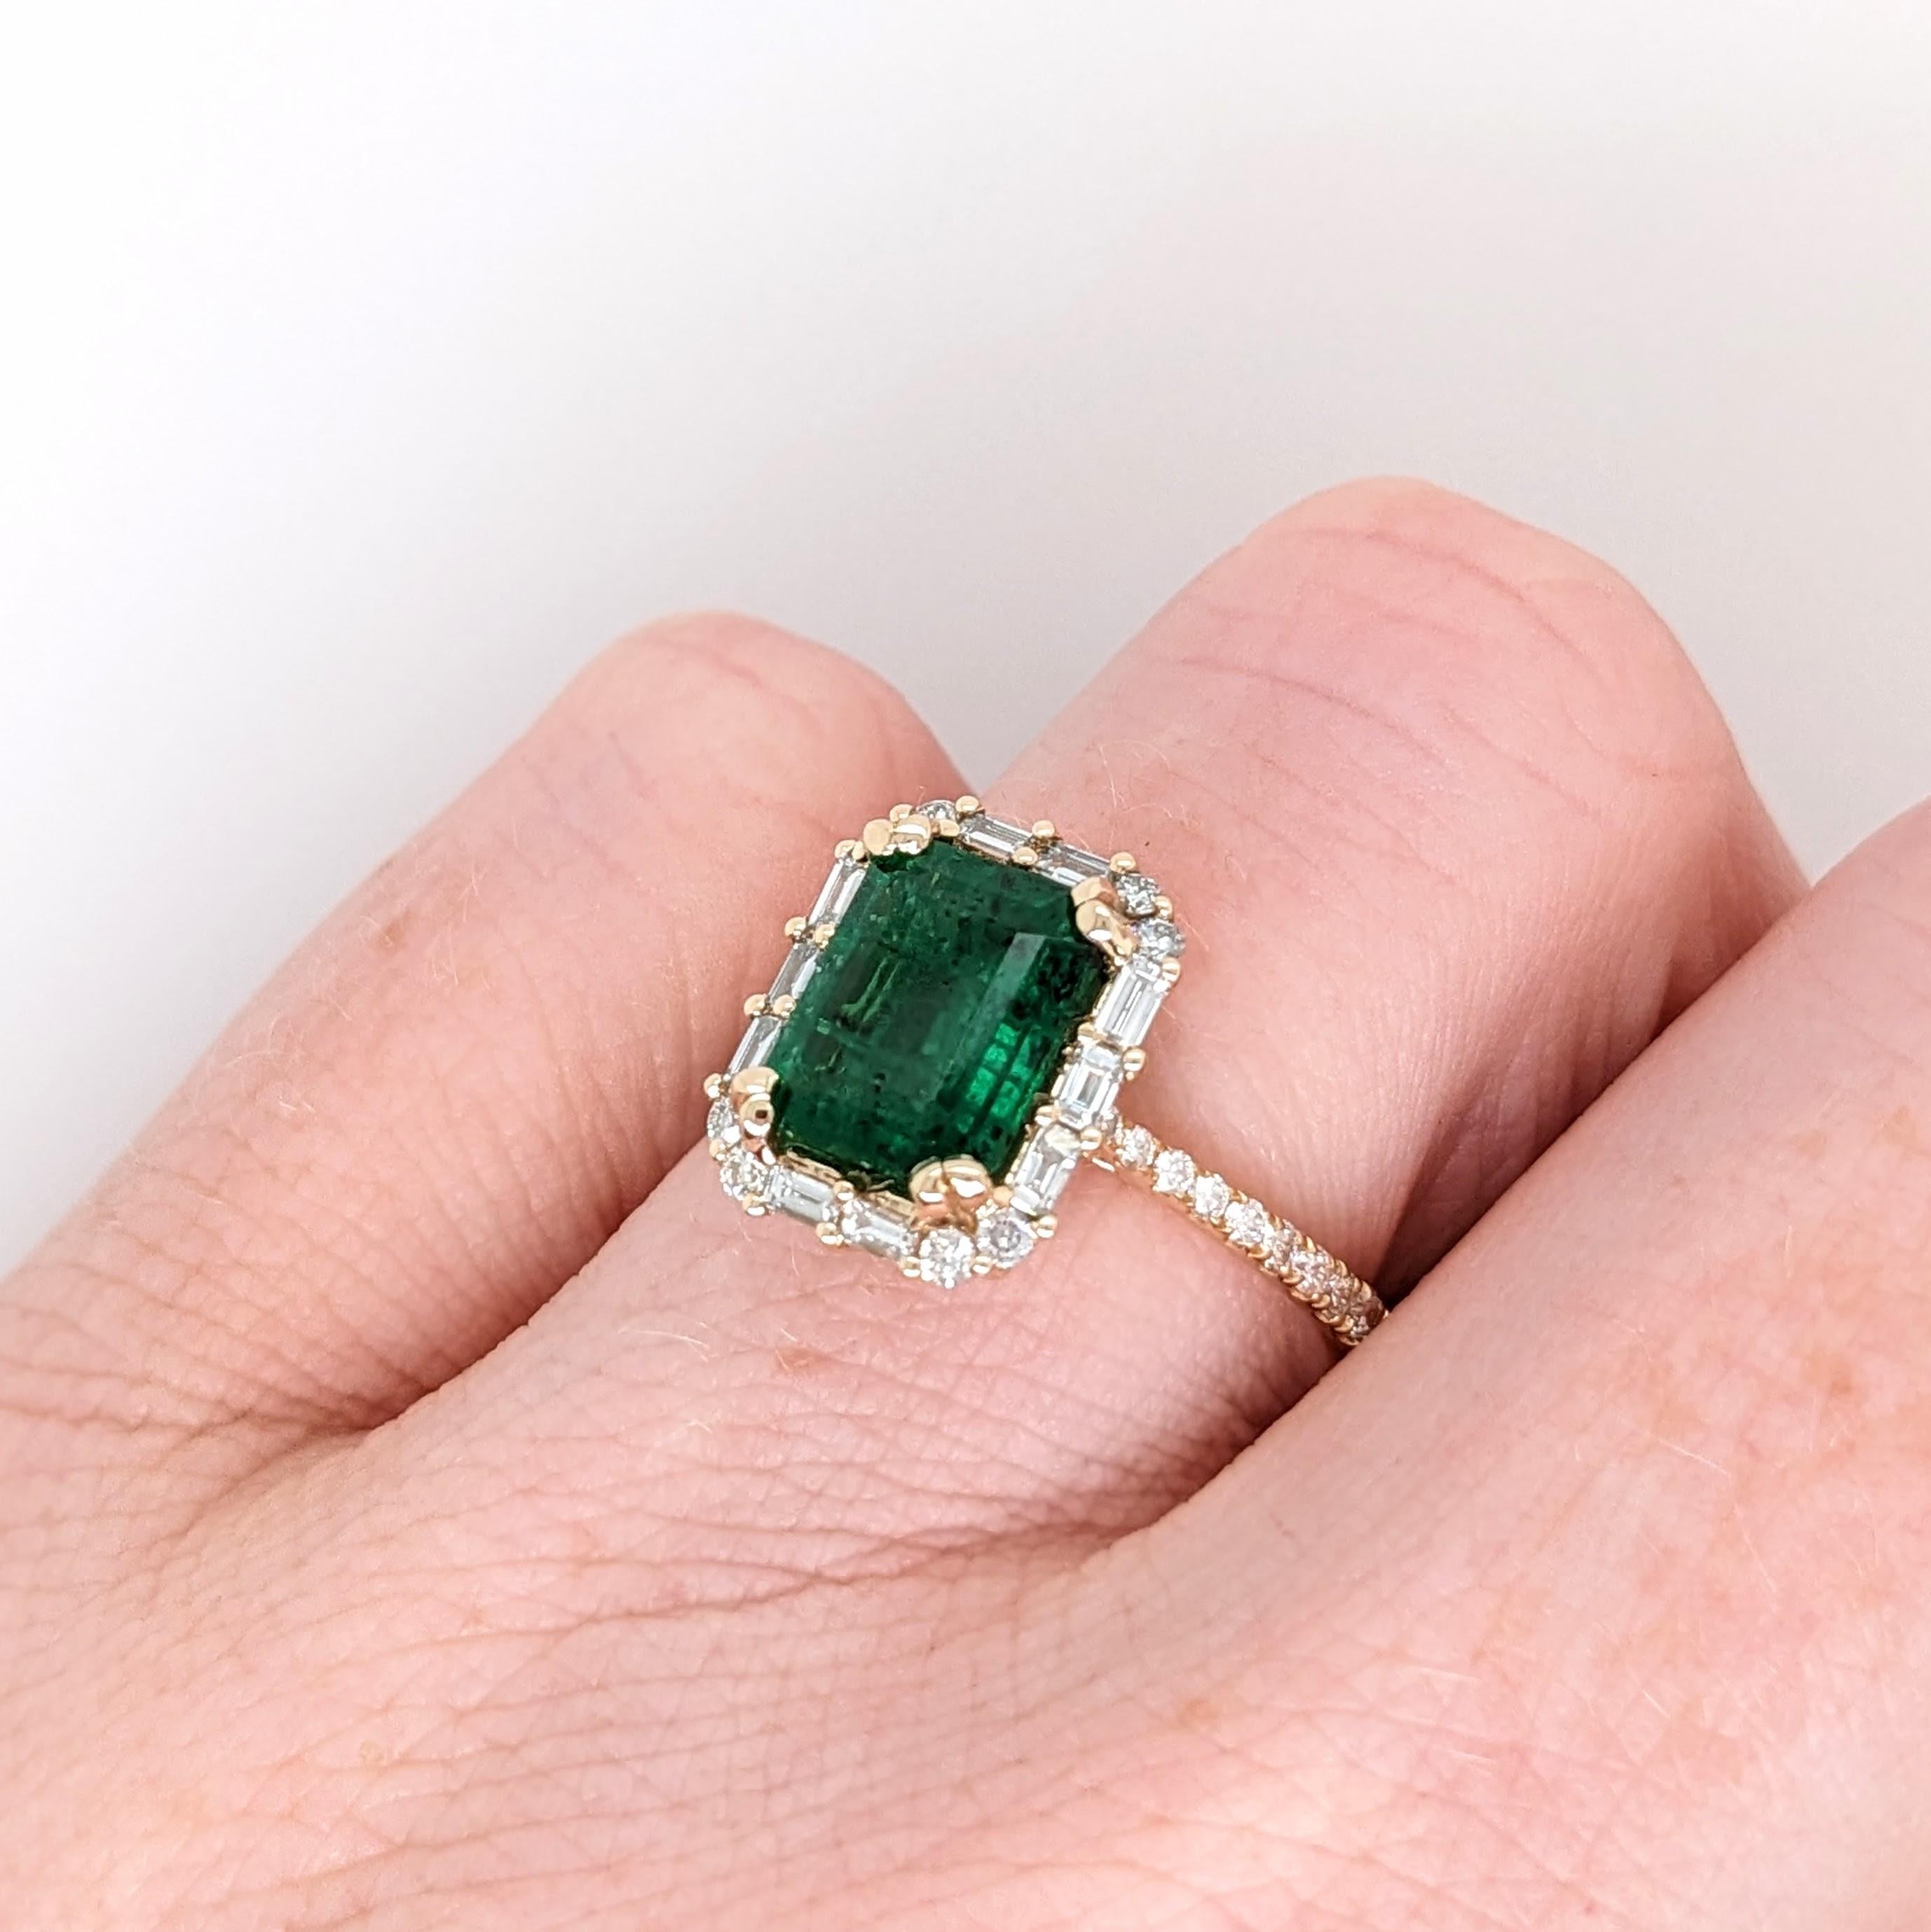 2ct Emerald Ring w Natural Diamonds in Solid 14k Yellow Gold Emerald cut 9x7mm 2